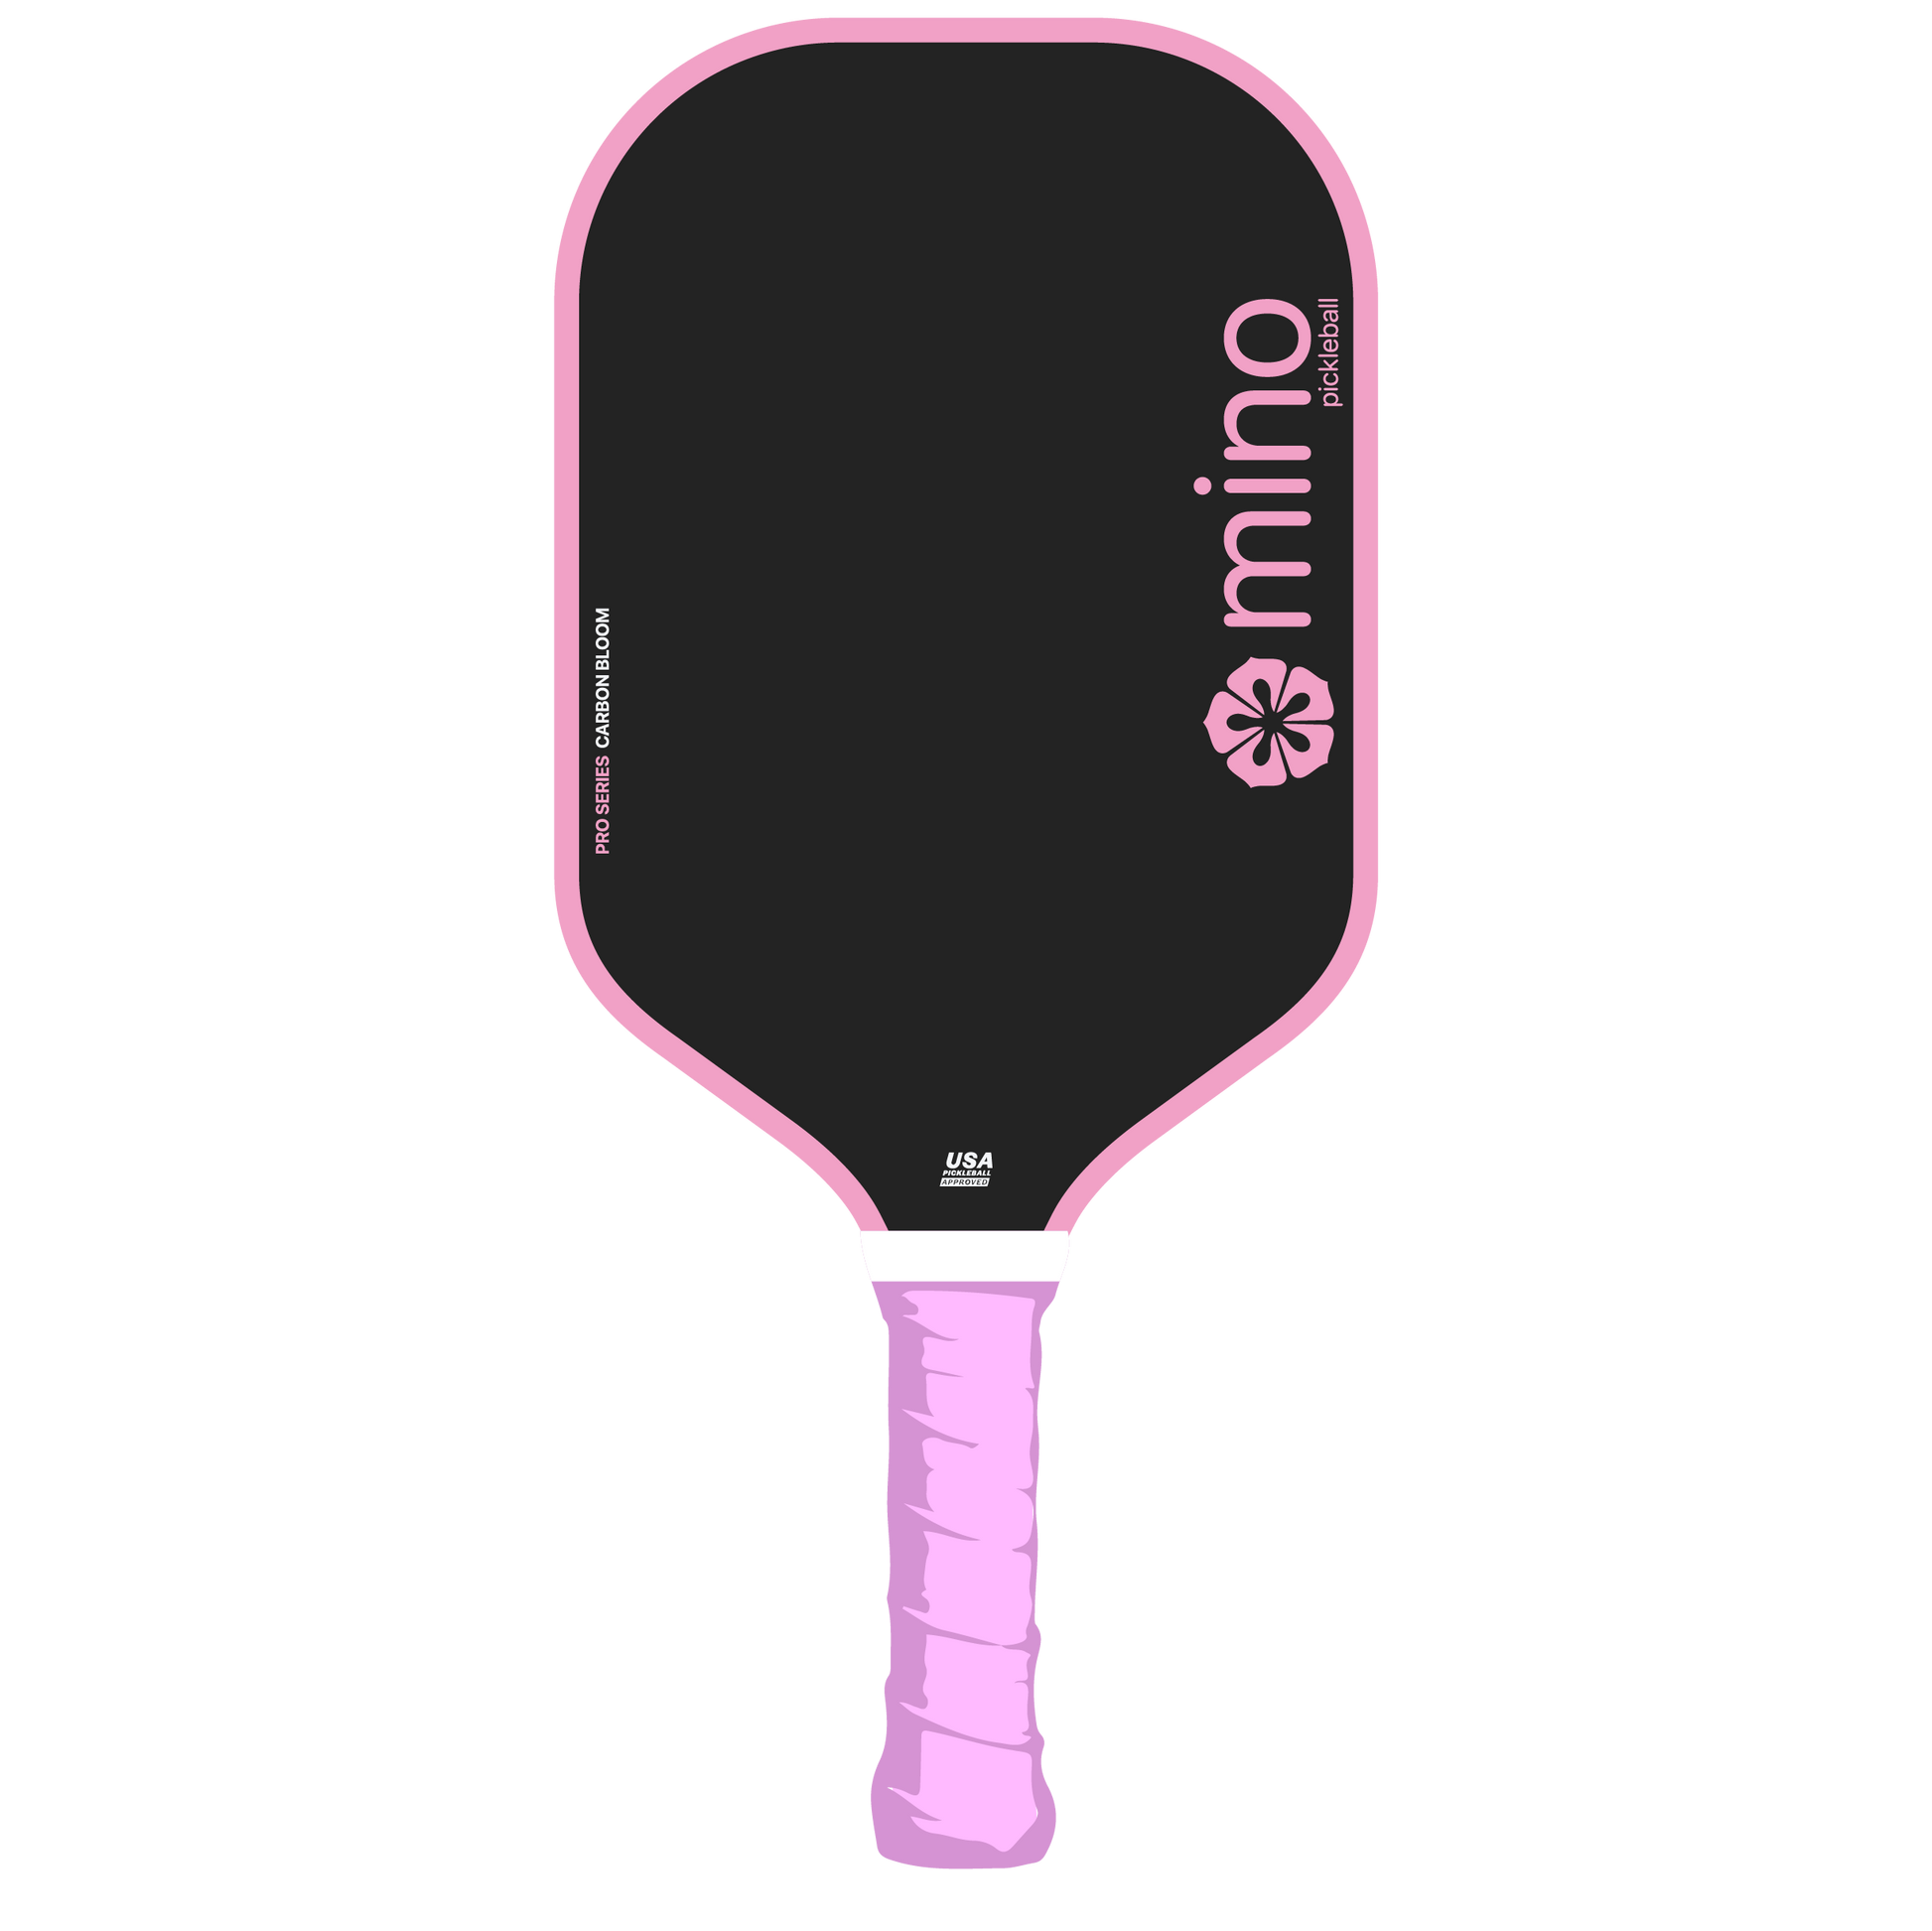 Mino Carbon Bloom Paddle